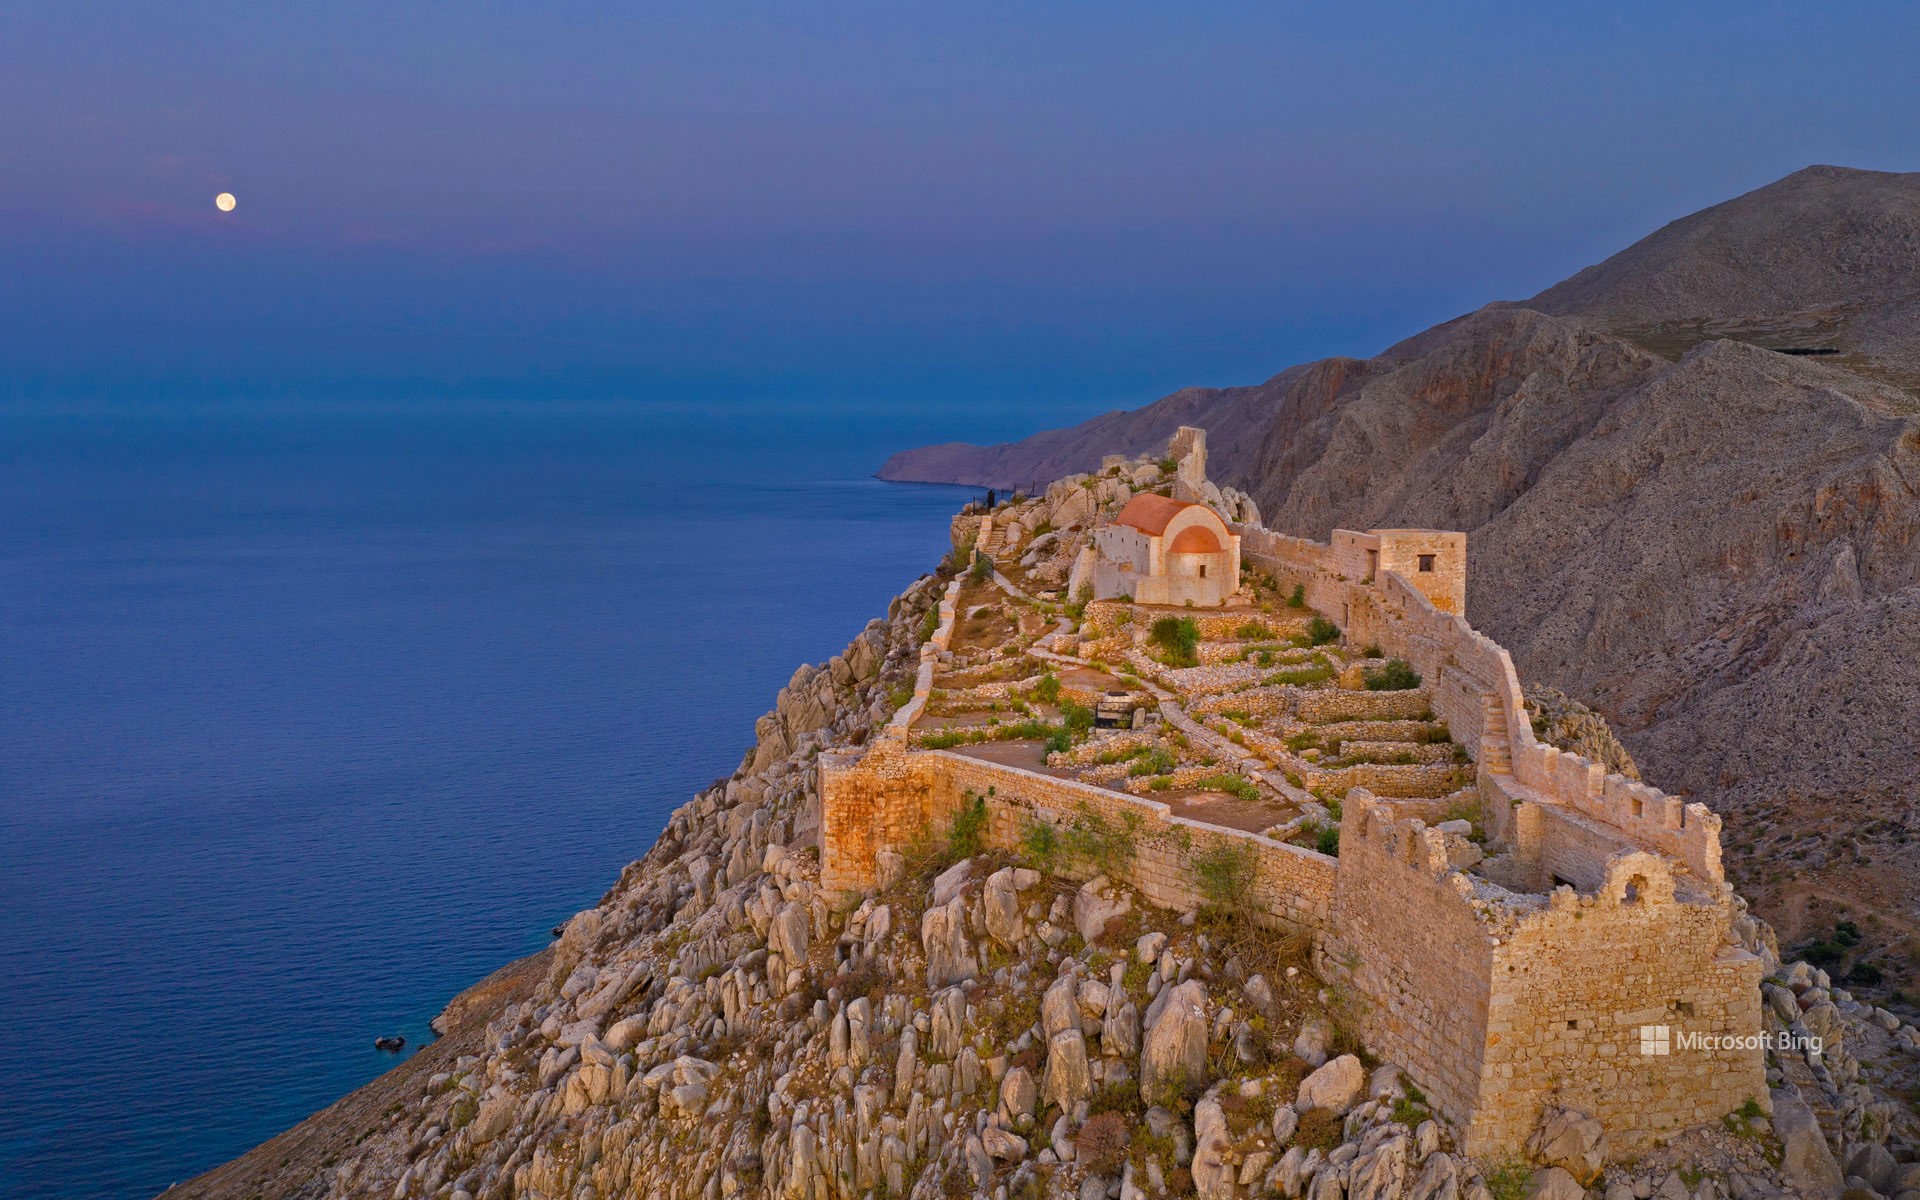 Ruins of the medieval castle of the Knights of St John above the village of Chorio, Halki Island, Greece